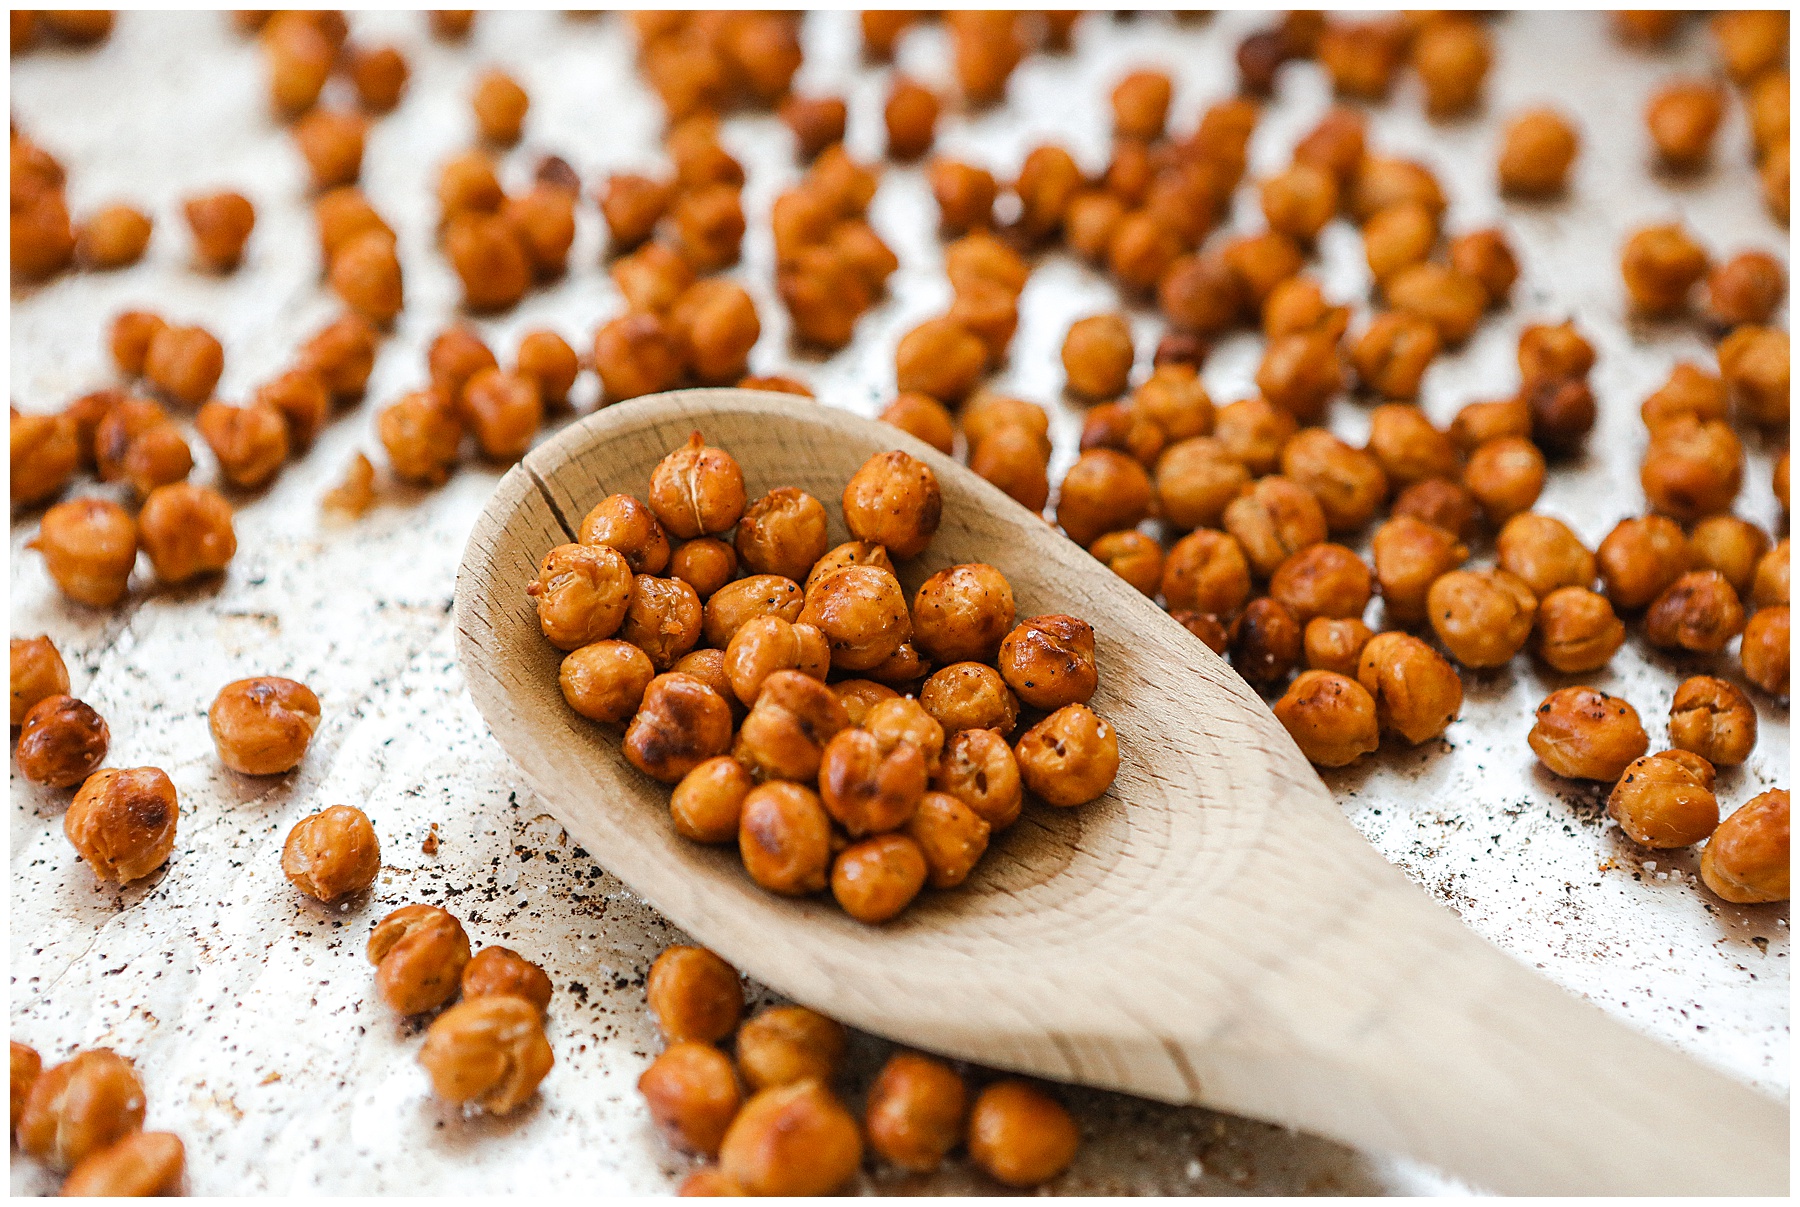 Chickpeas cooked